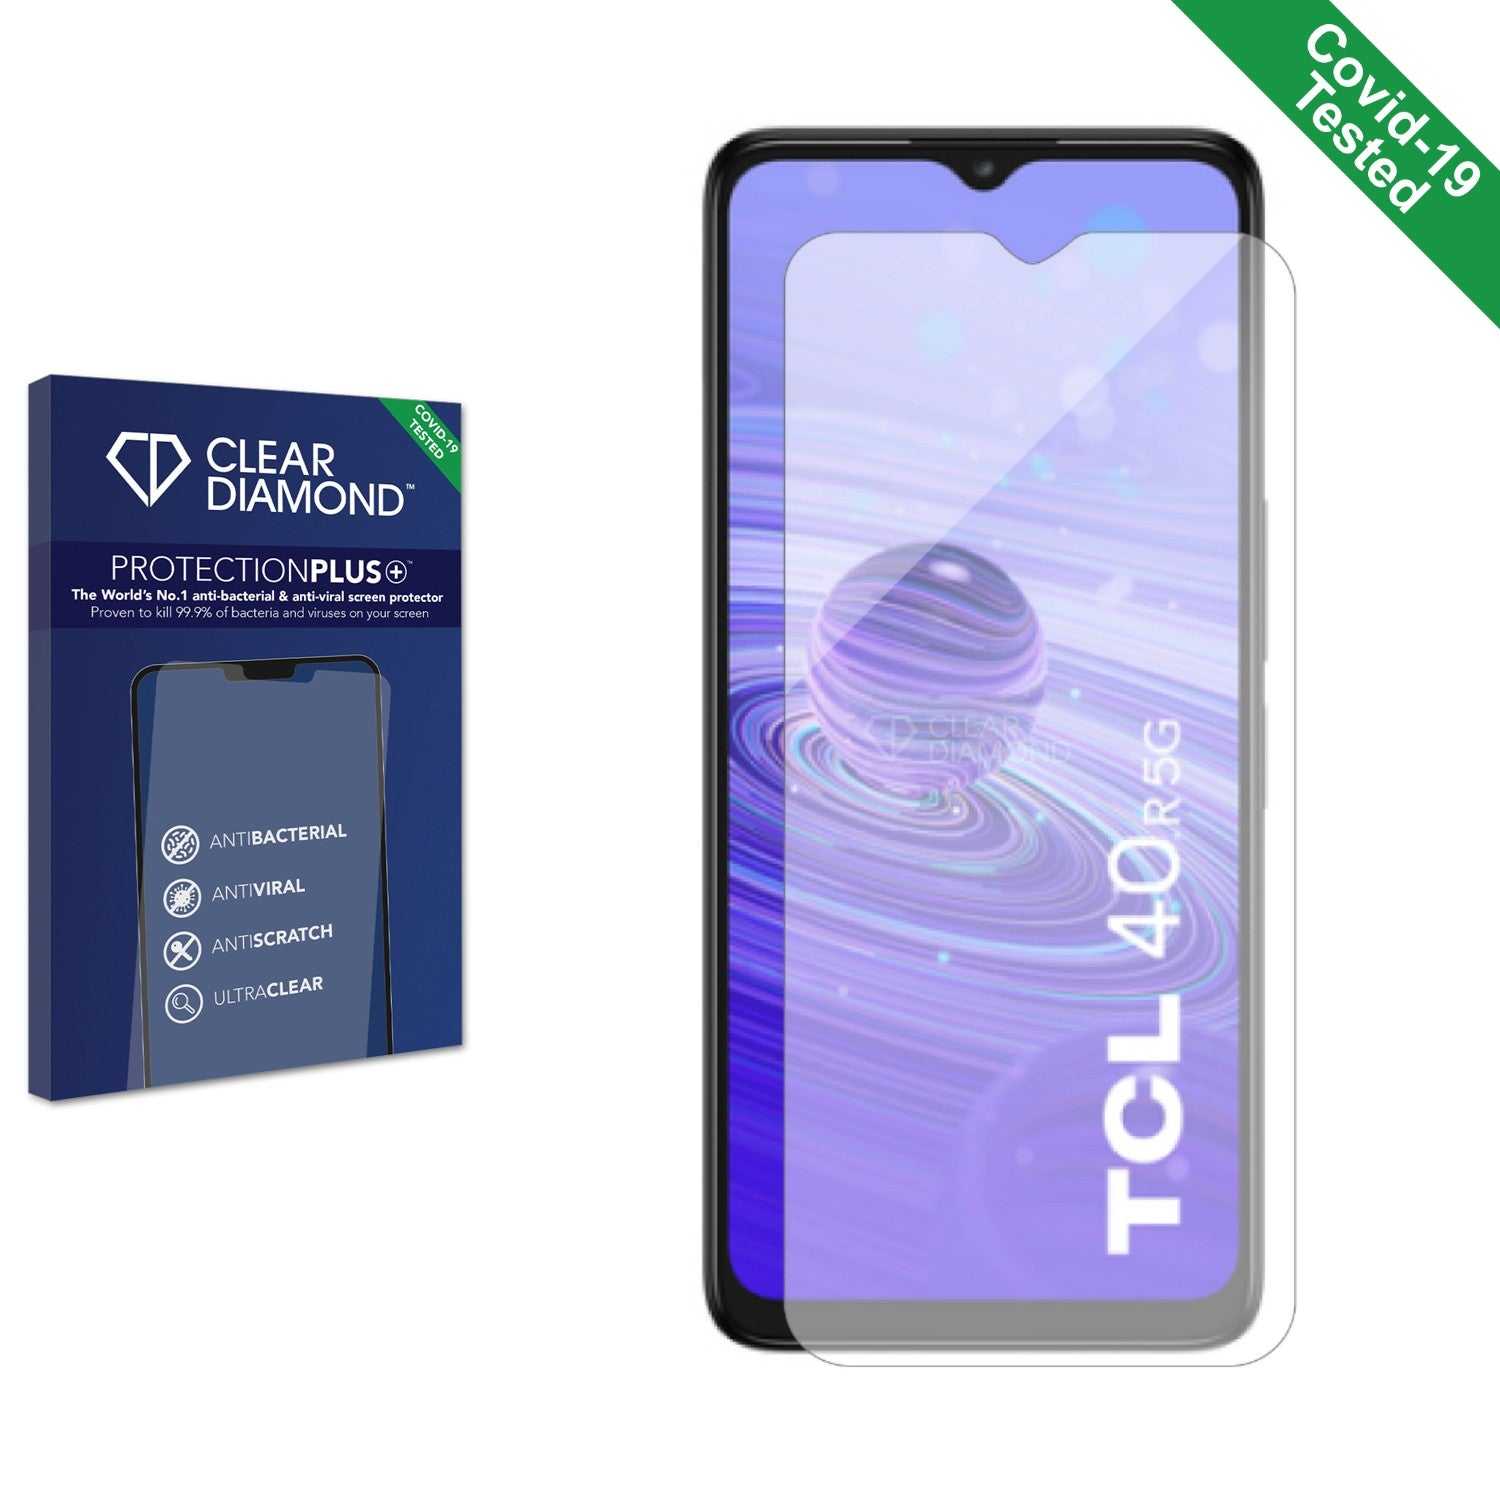 ScreenShield, Clear Diamond Anti-viral Screen Protector for TCL 40 R